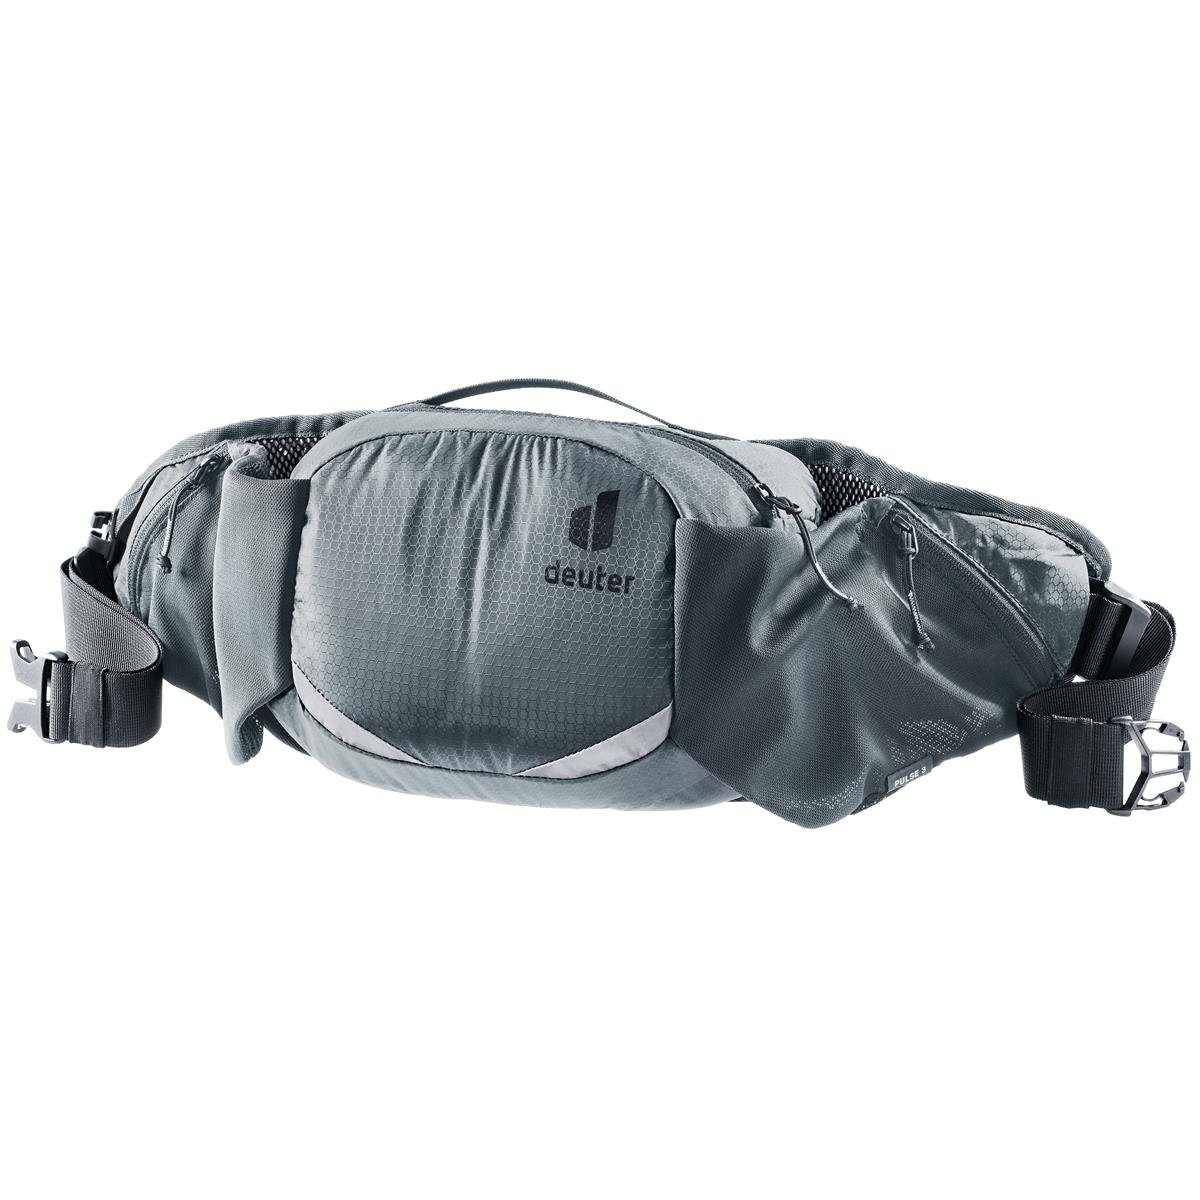 Deuter Hip Pack with Hydration System Compartment Pulse 3 Graphite